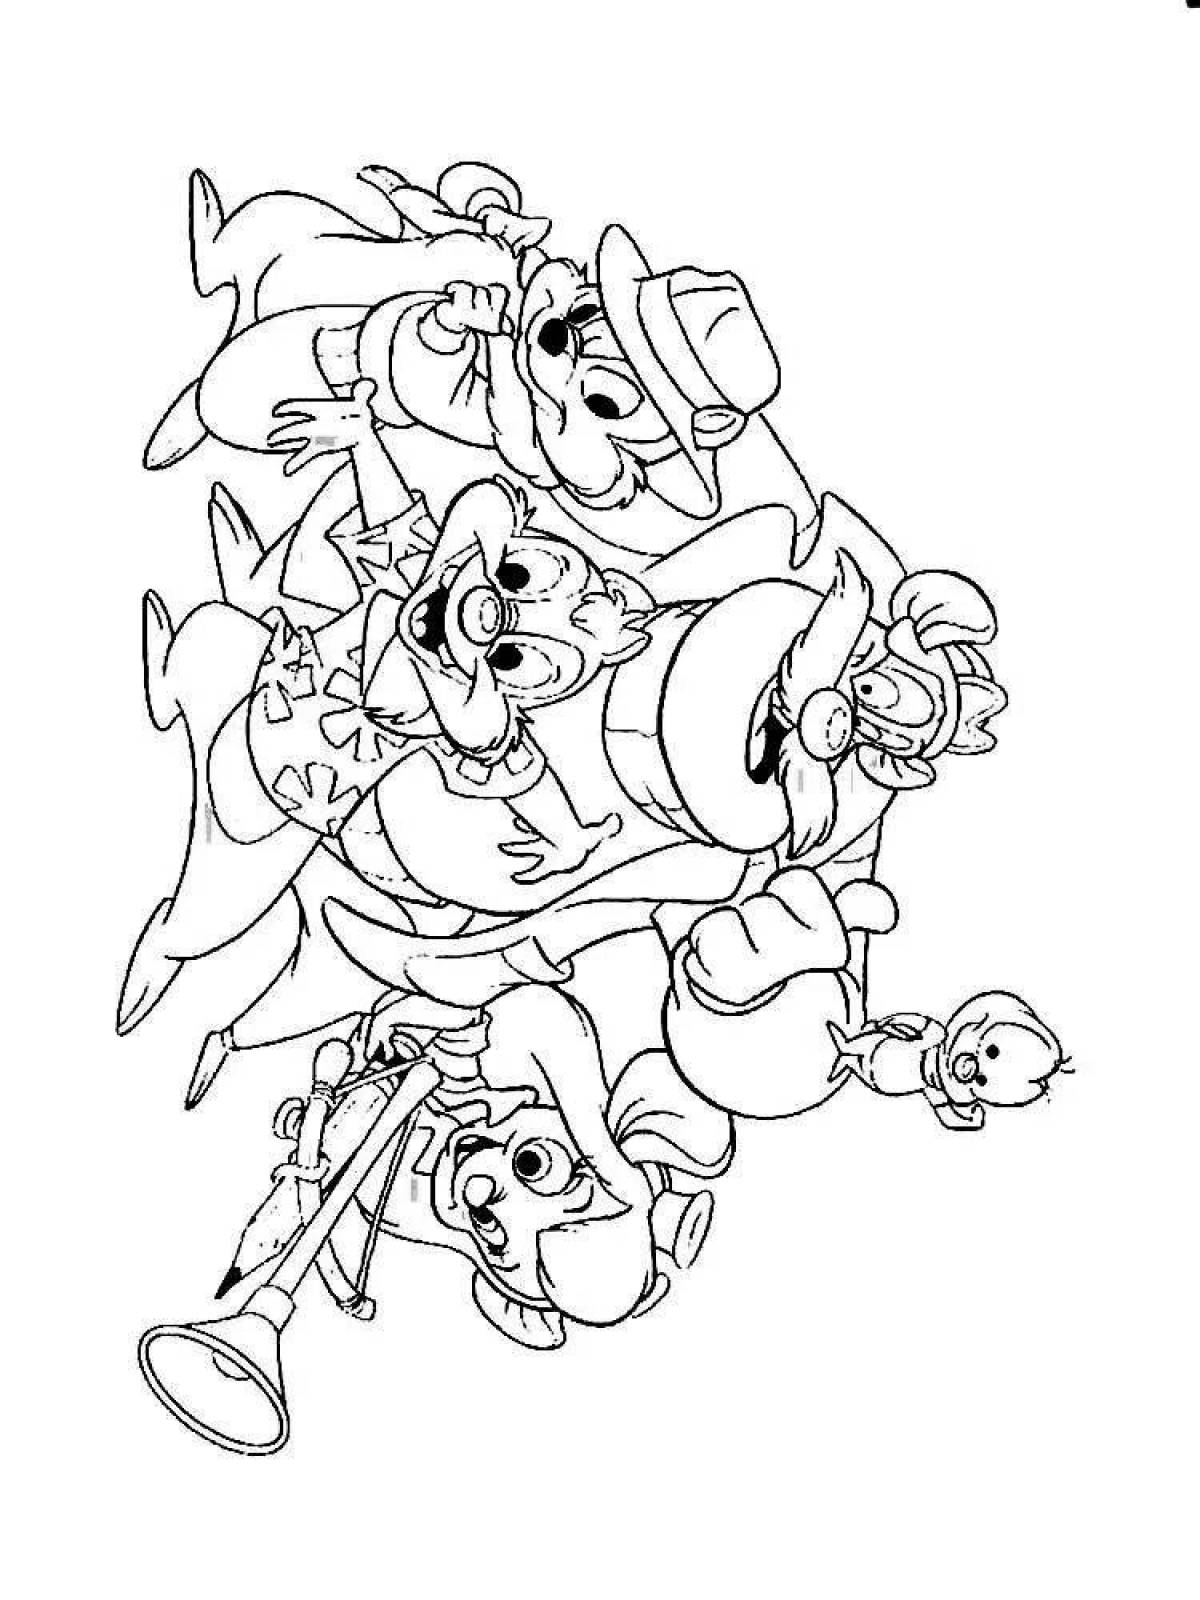 Joyful chip and dale coloring